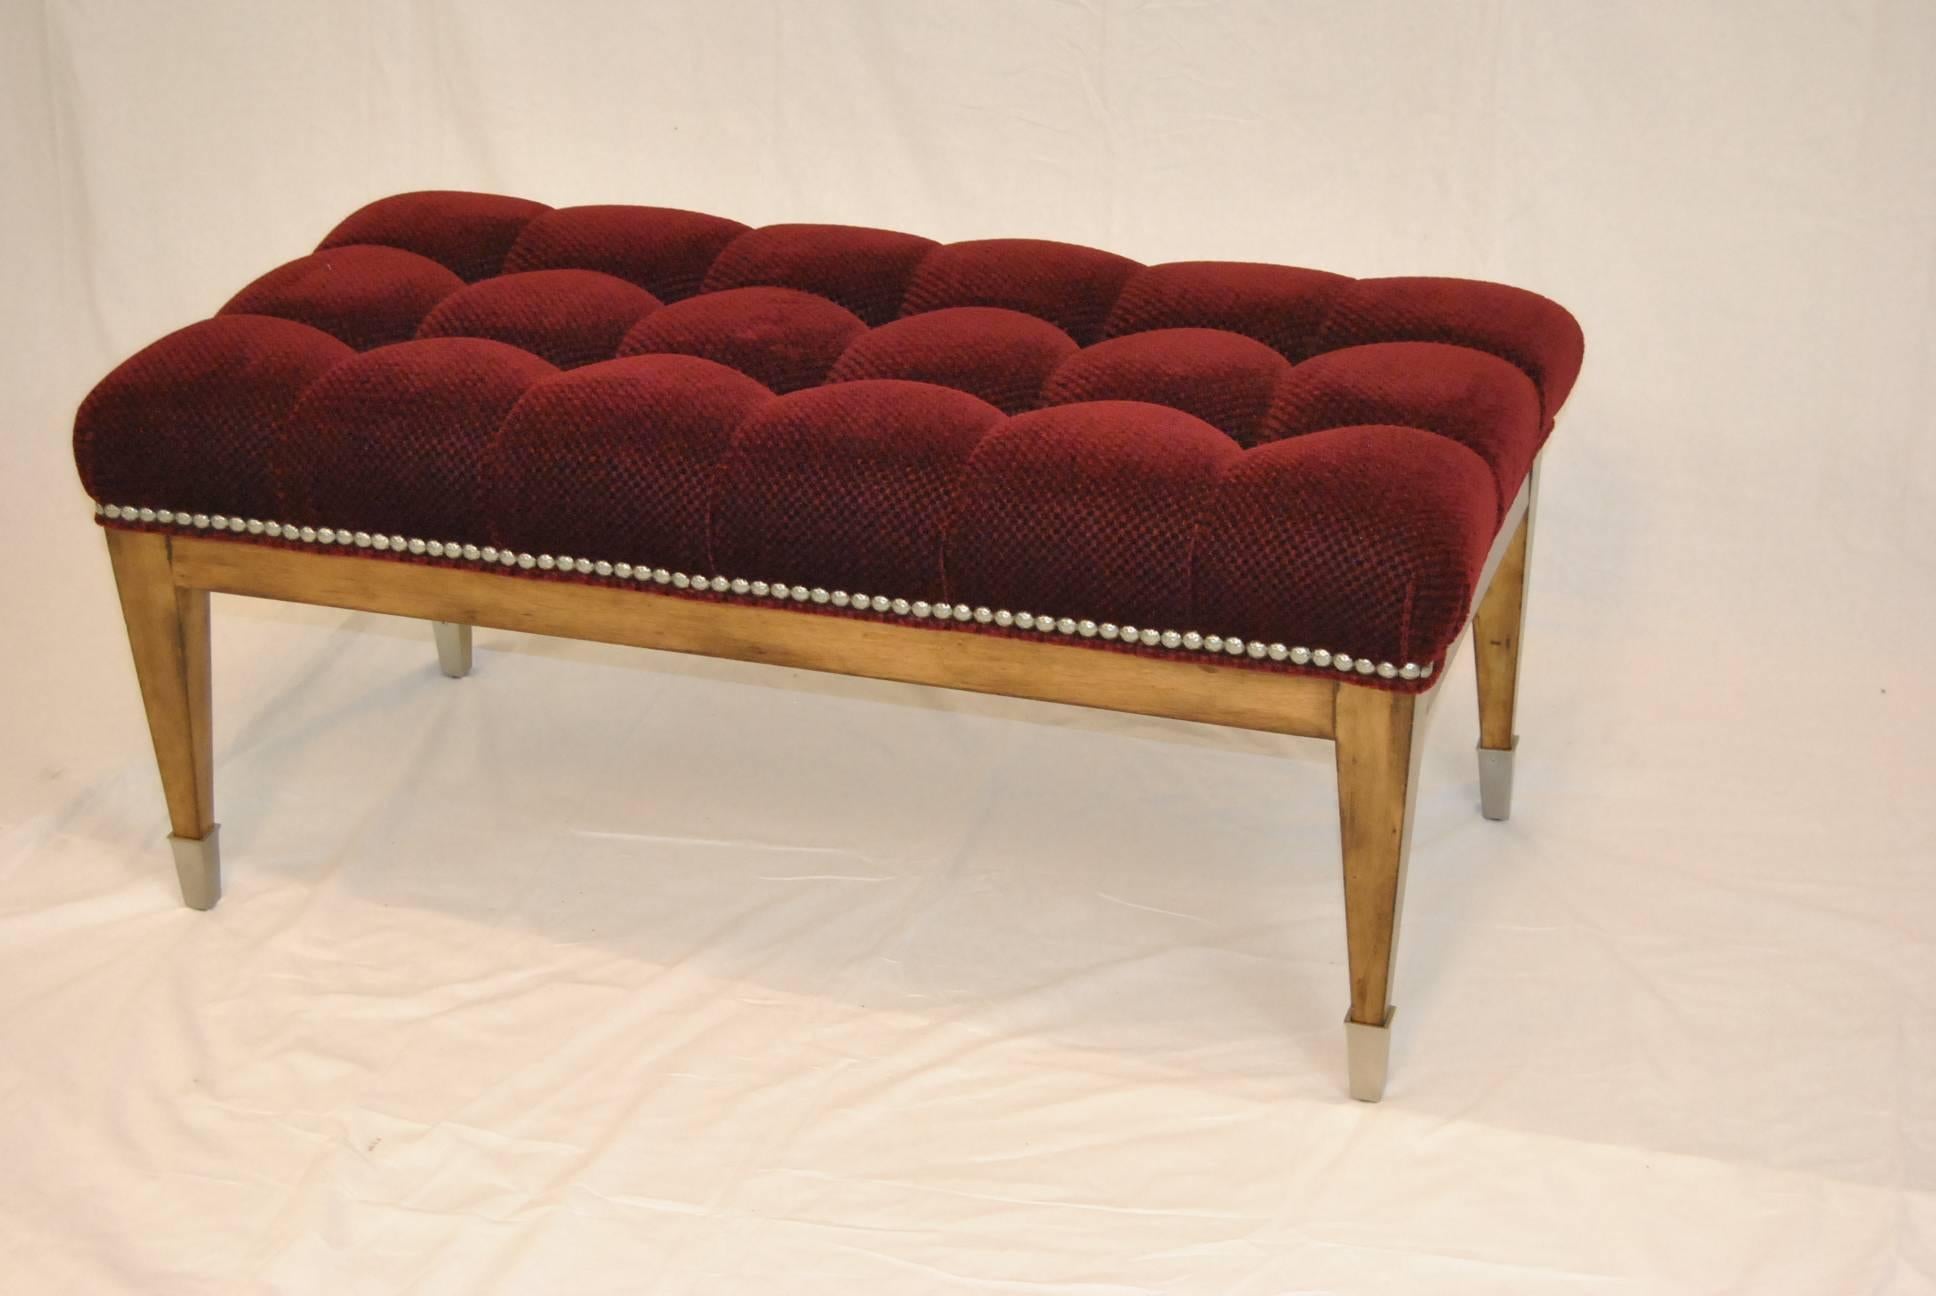 An attractive upholstered mohair bench by Swain. It features ample cushioning, a solid wood frame, burgundy mohair cover, pewter feet caps and nailhead trim. Very good condition with very minimal wear.